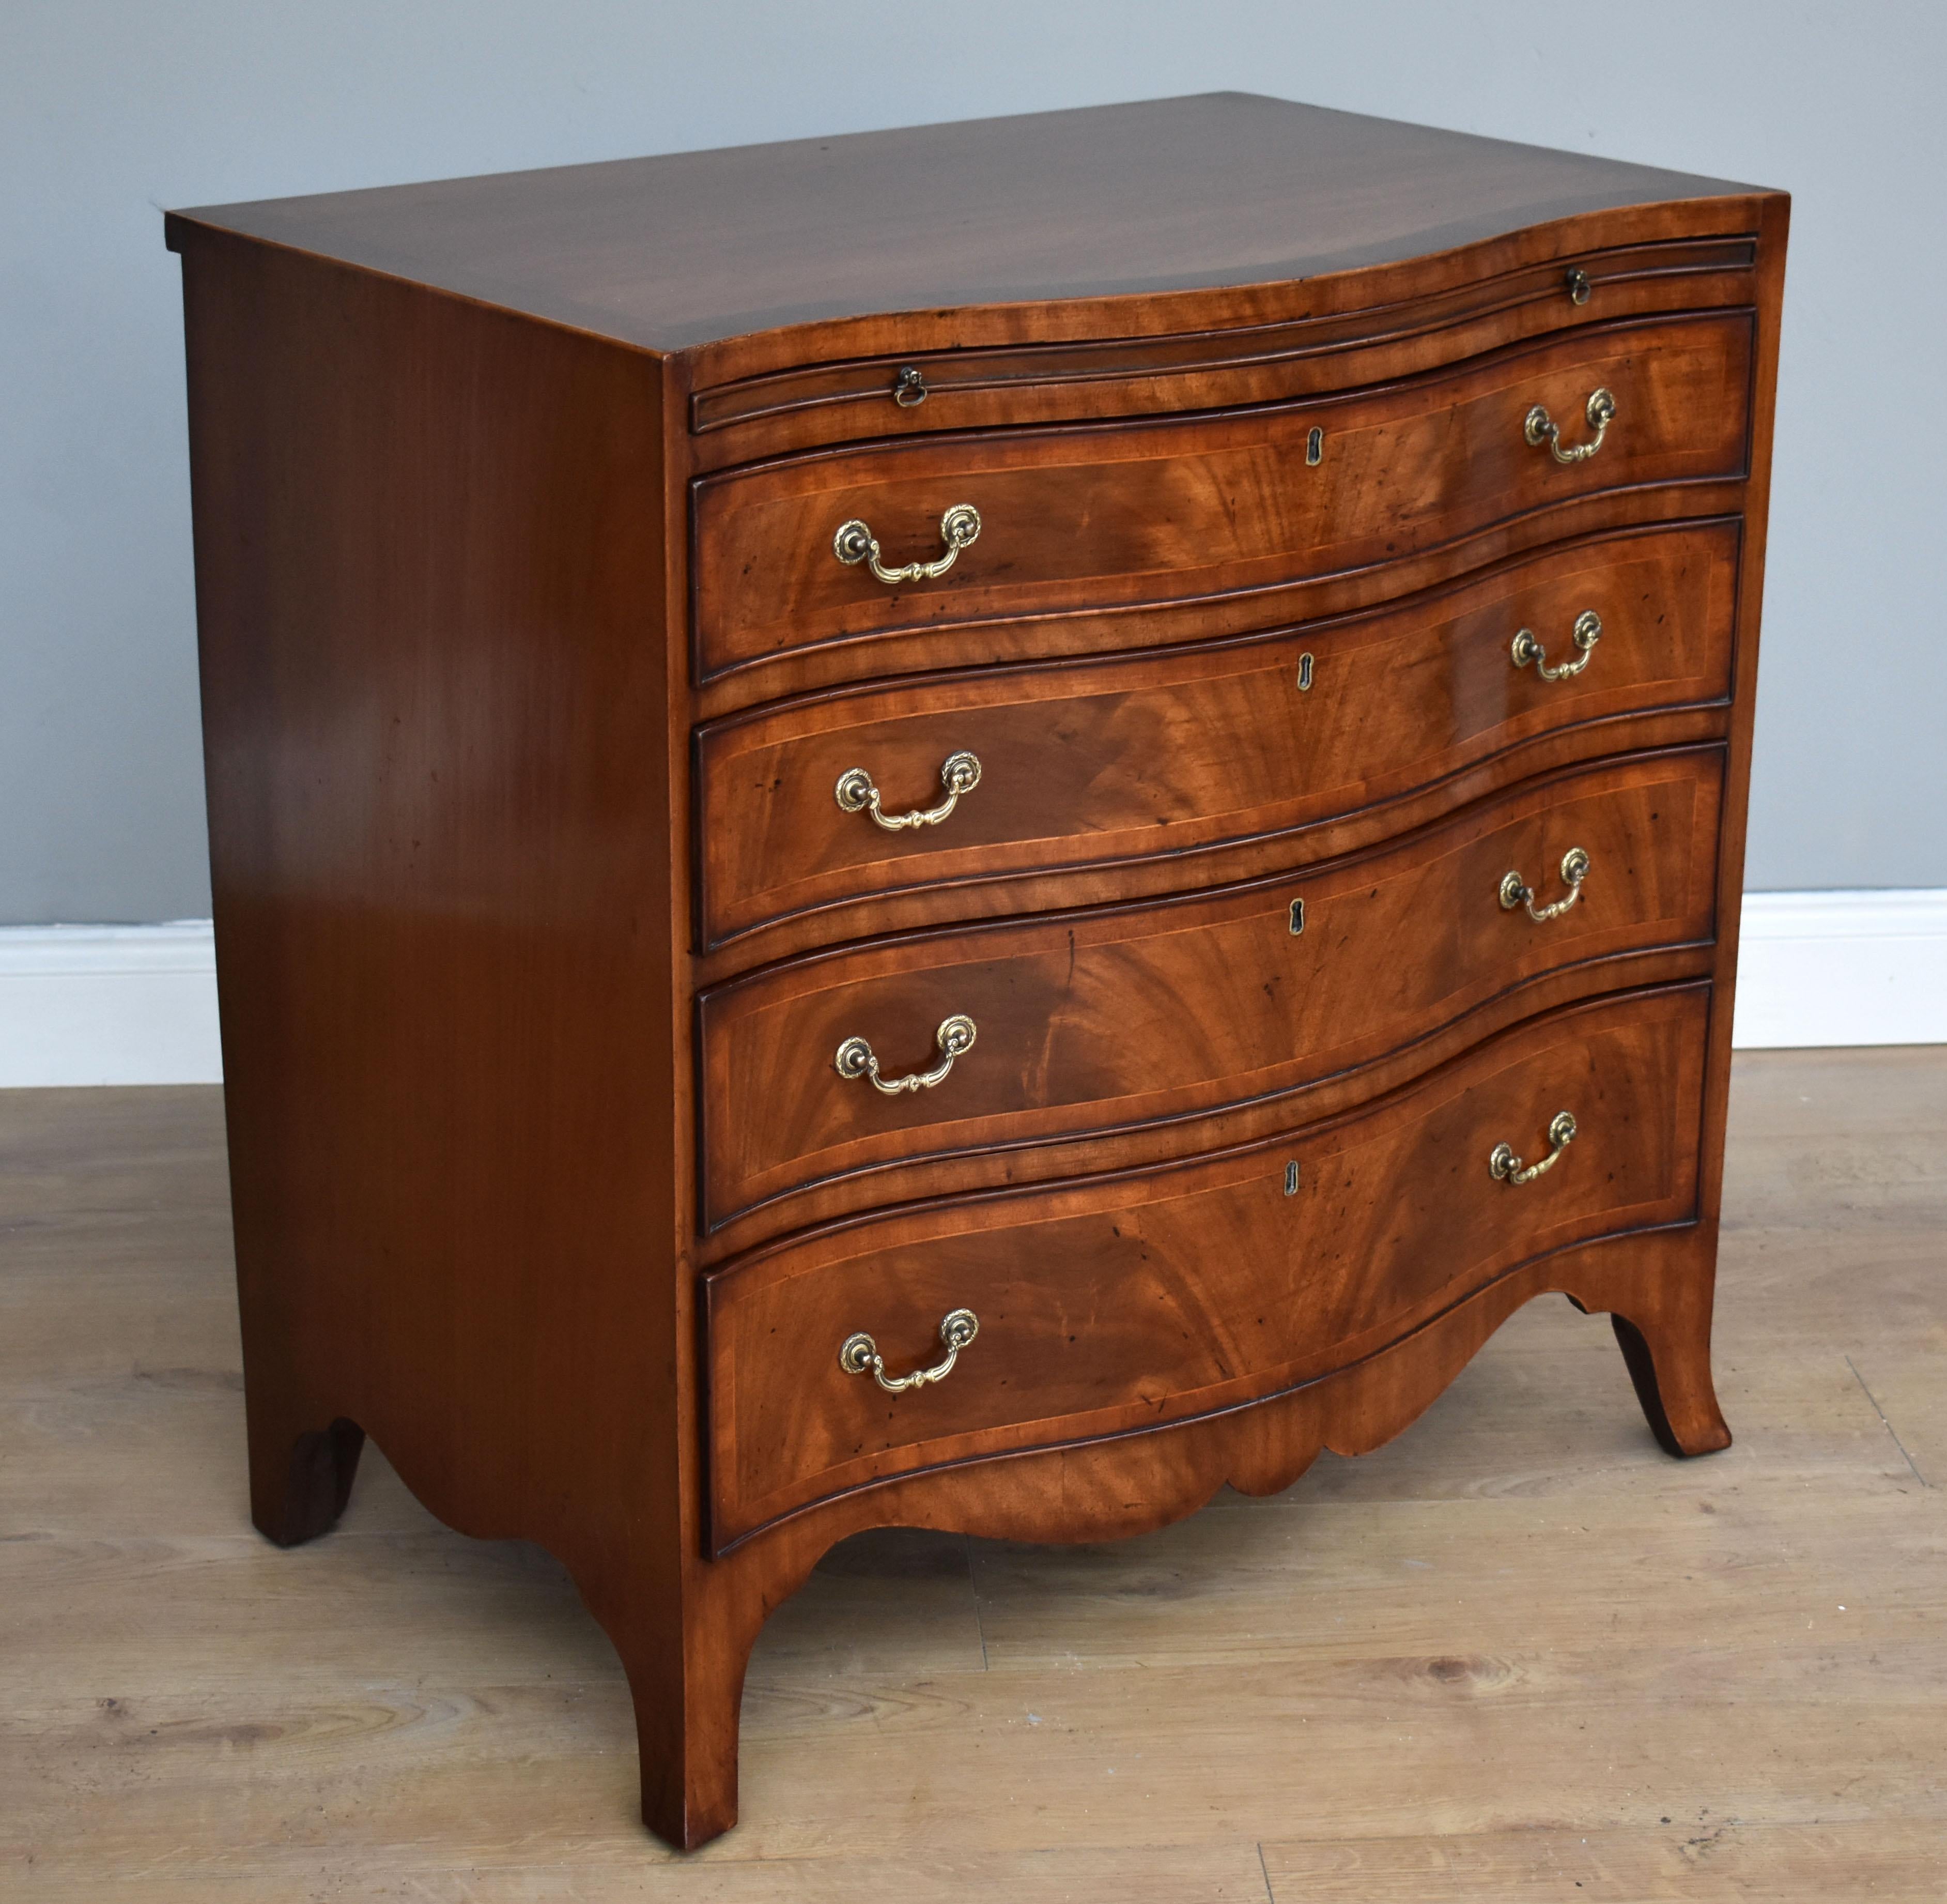 For sale is a good quality Georgian style mahogany serpentine chest. The chest has a brushing slide with two brass pulls, above an arrangement of four graduated drawers, each with brass handles. The chest is raised on splay feet and is in good